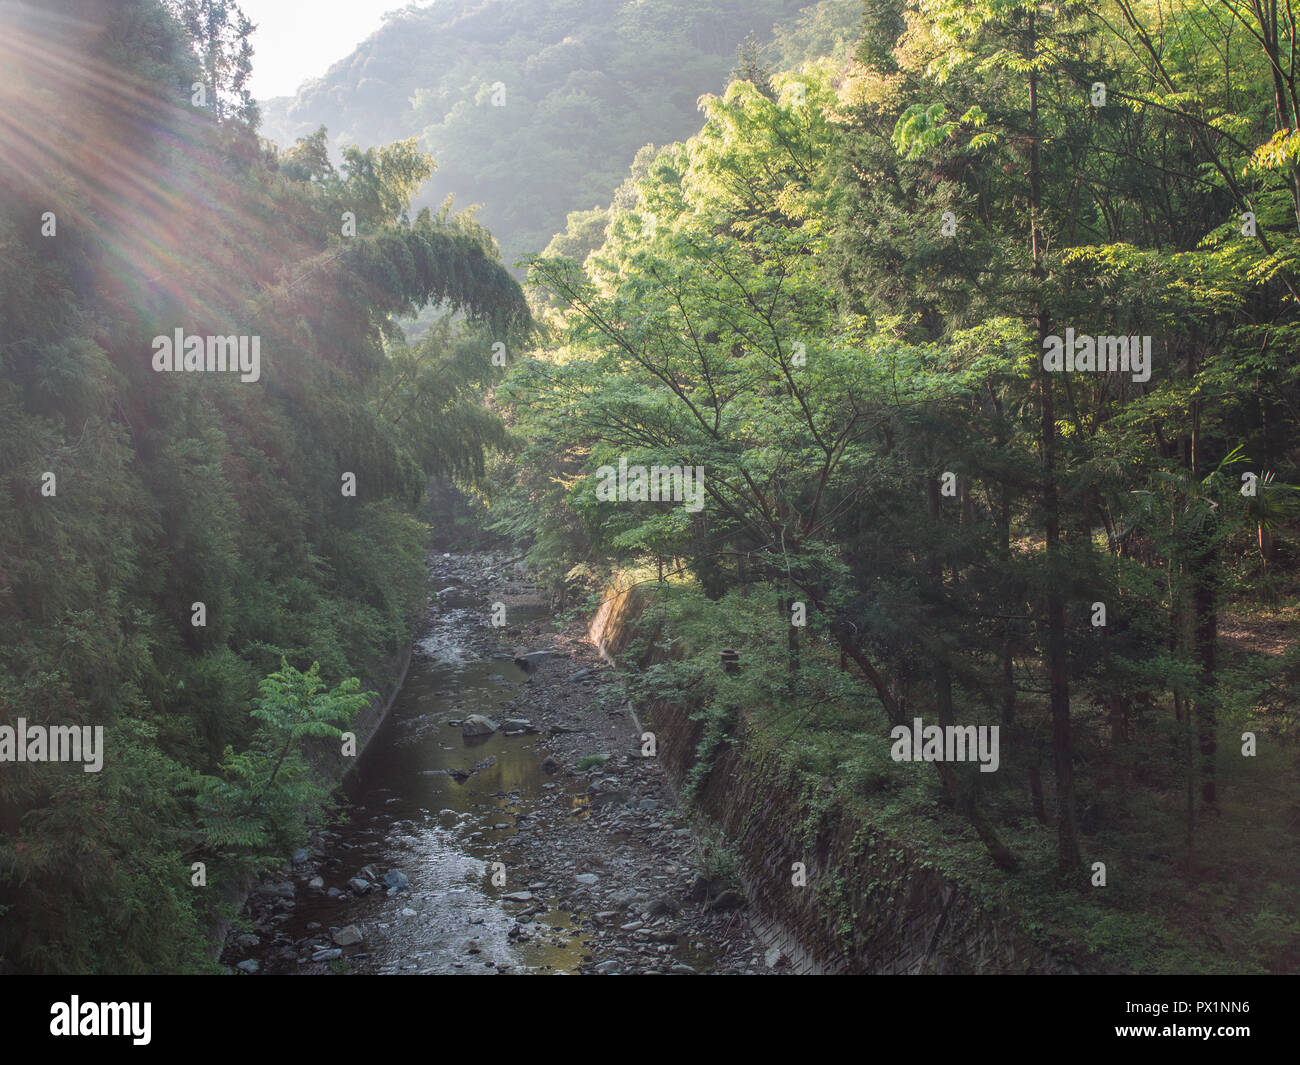 Rays of light, wild trees bright early morning light,  below in shadow, stream flowing between concrete walls,  Ehime, Shikoku, Japan Stock Photo